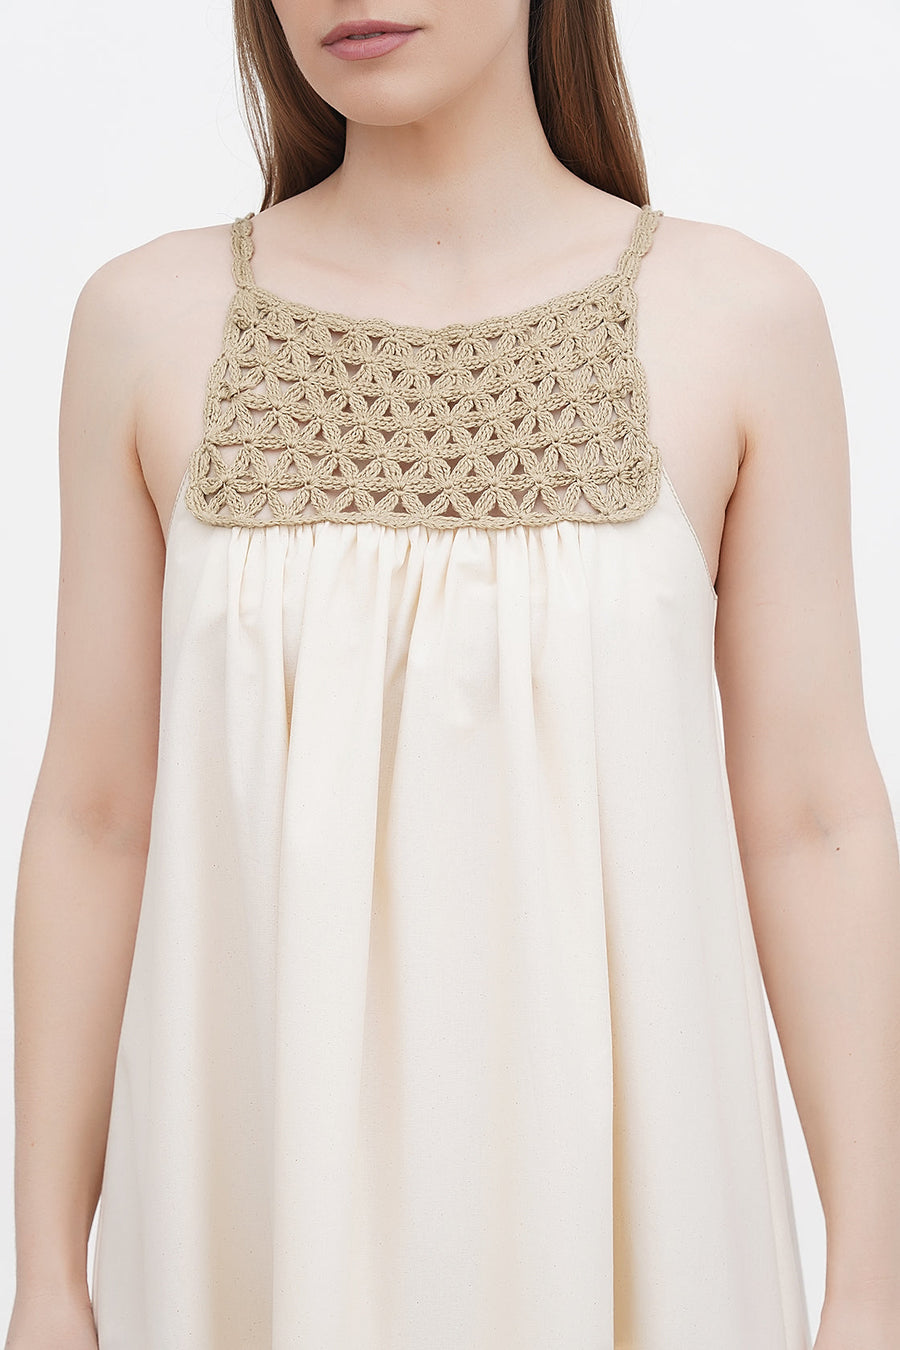 A Model Wearing Beige Organic Cotton Organic dress with hand knitted bodice, curated by Only Ethikal